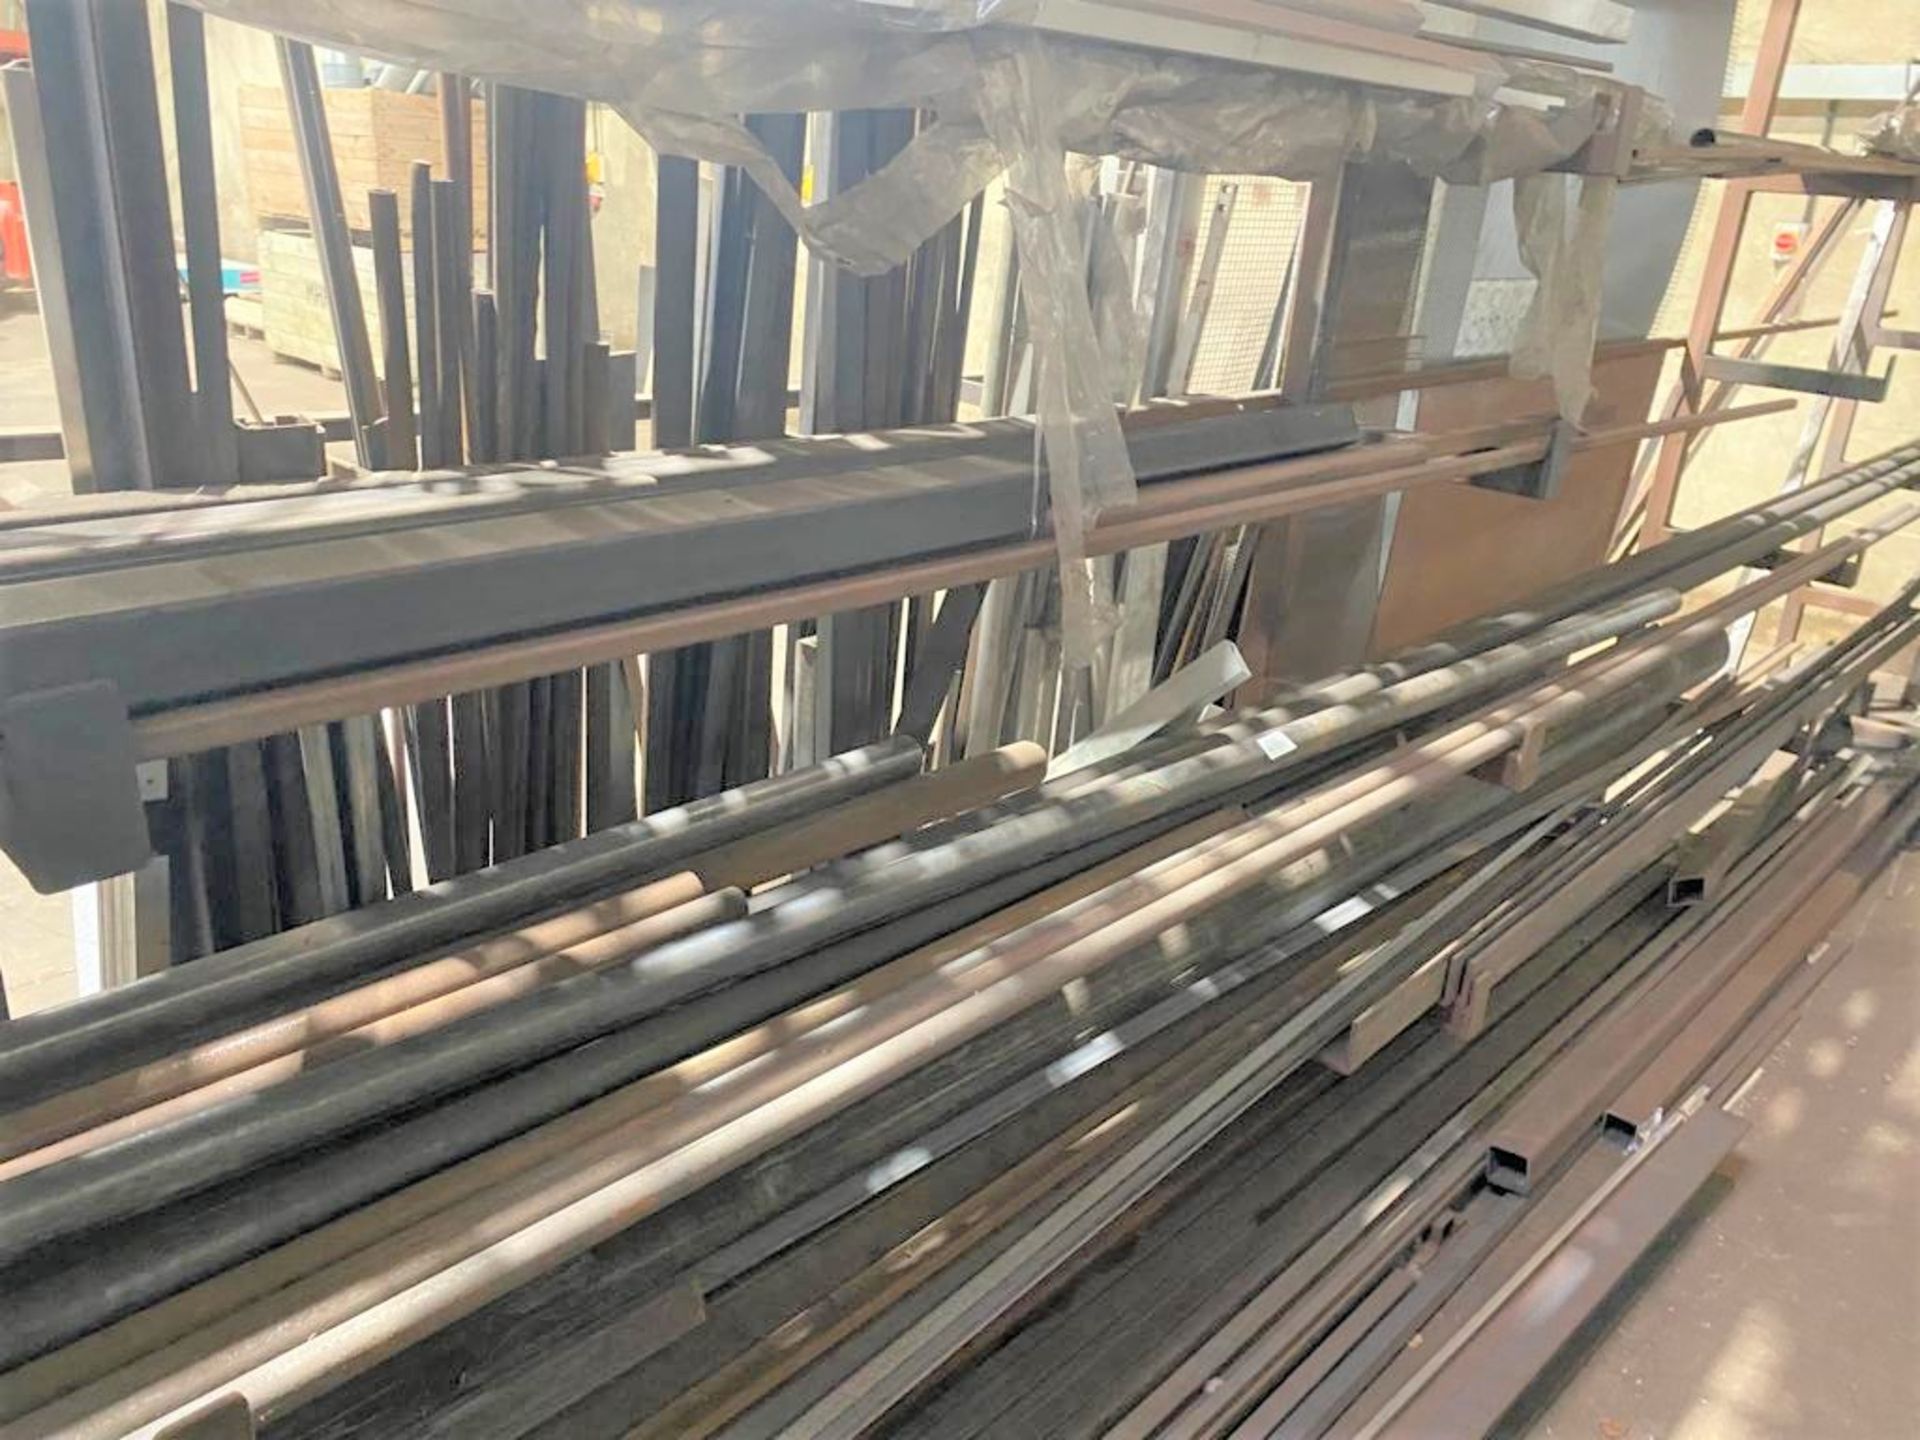 1 x Assorted Lot of Mild Steel Tubing, Strips and Box Sections - Various Lengths Upto 6 Meters in